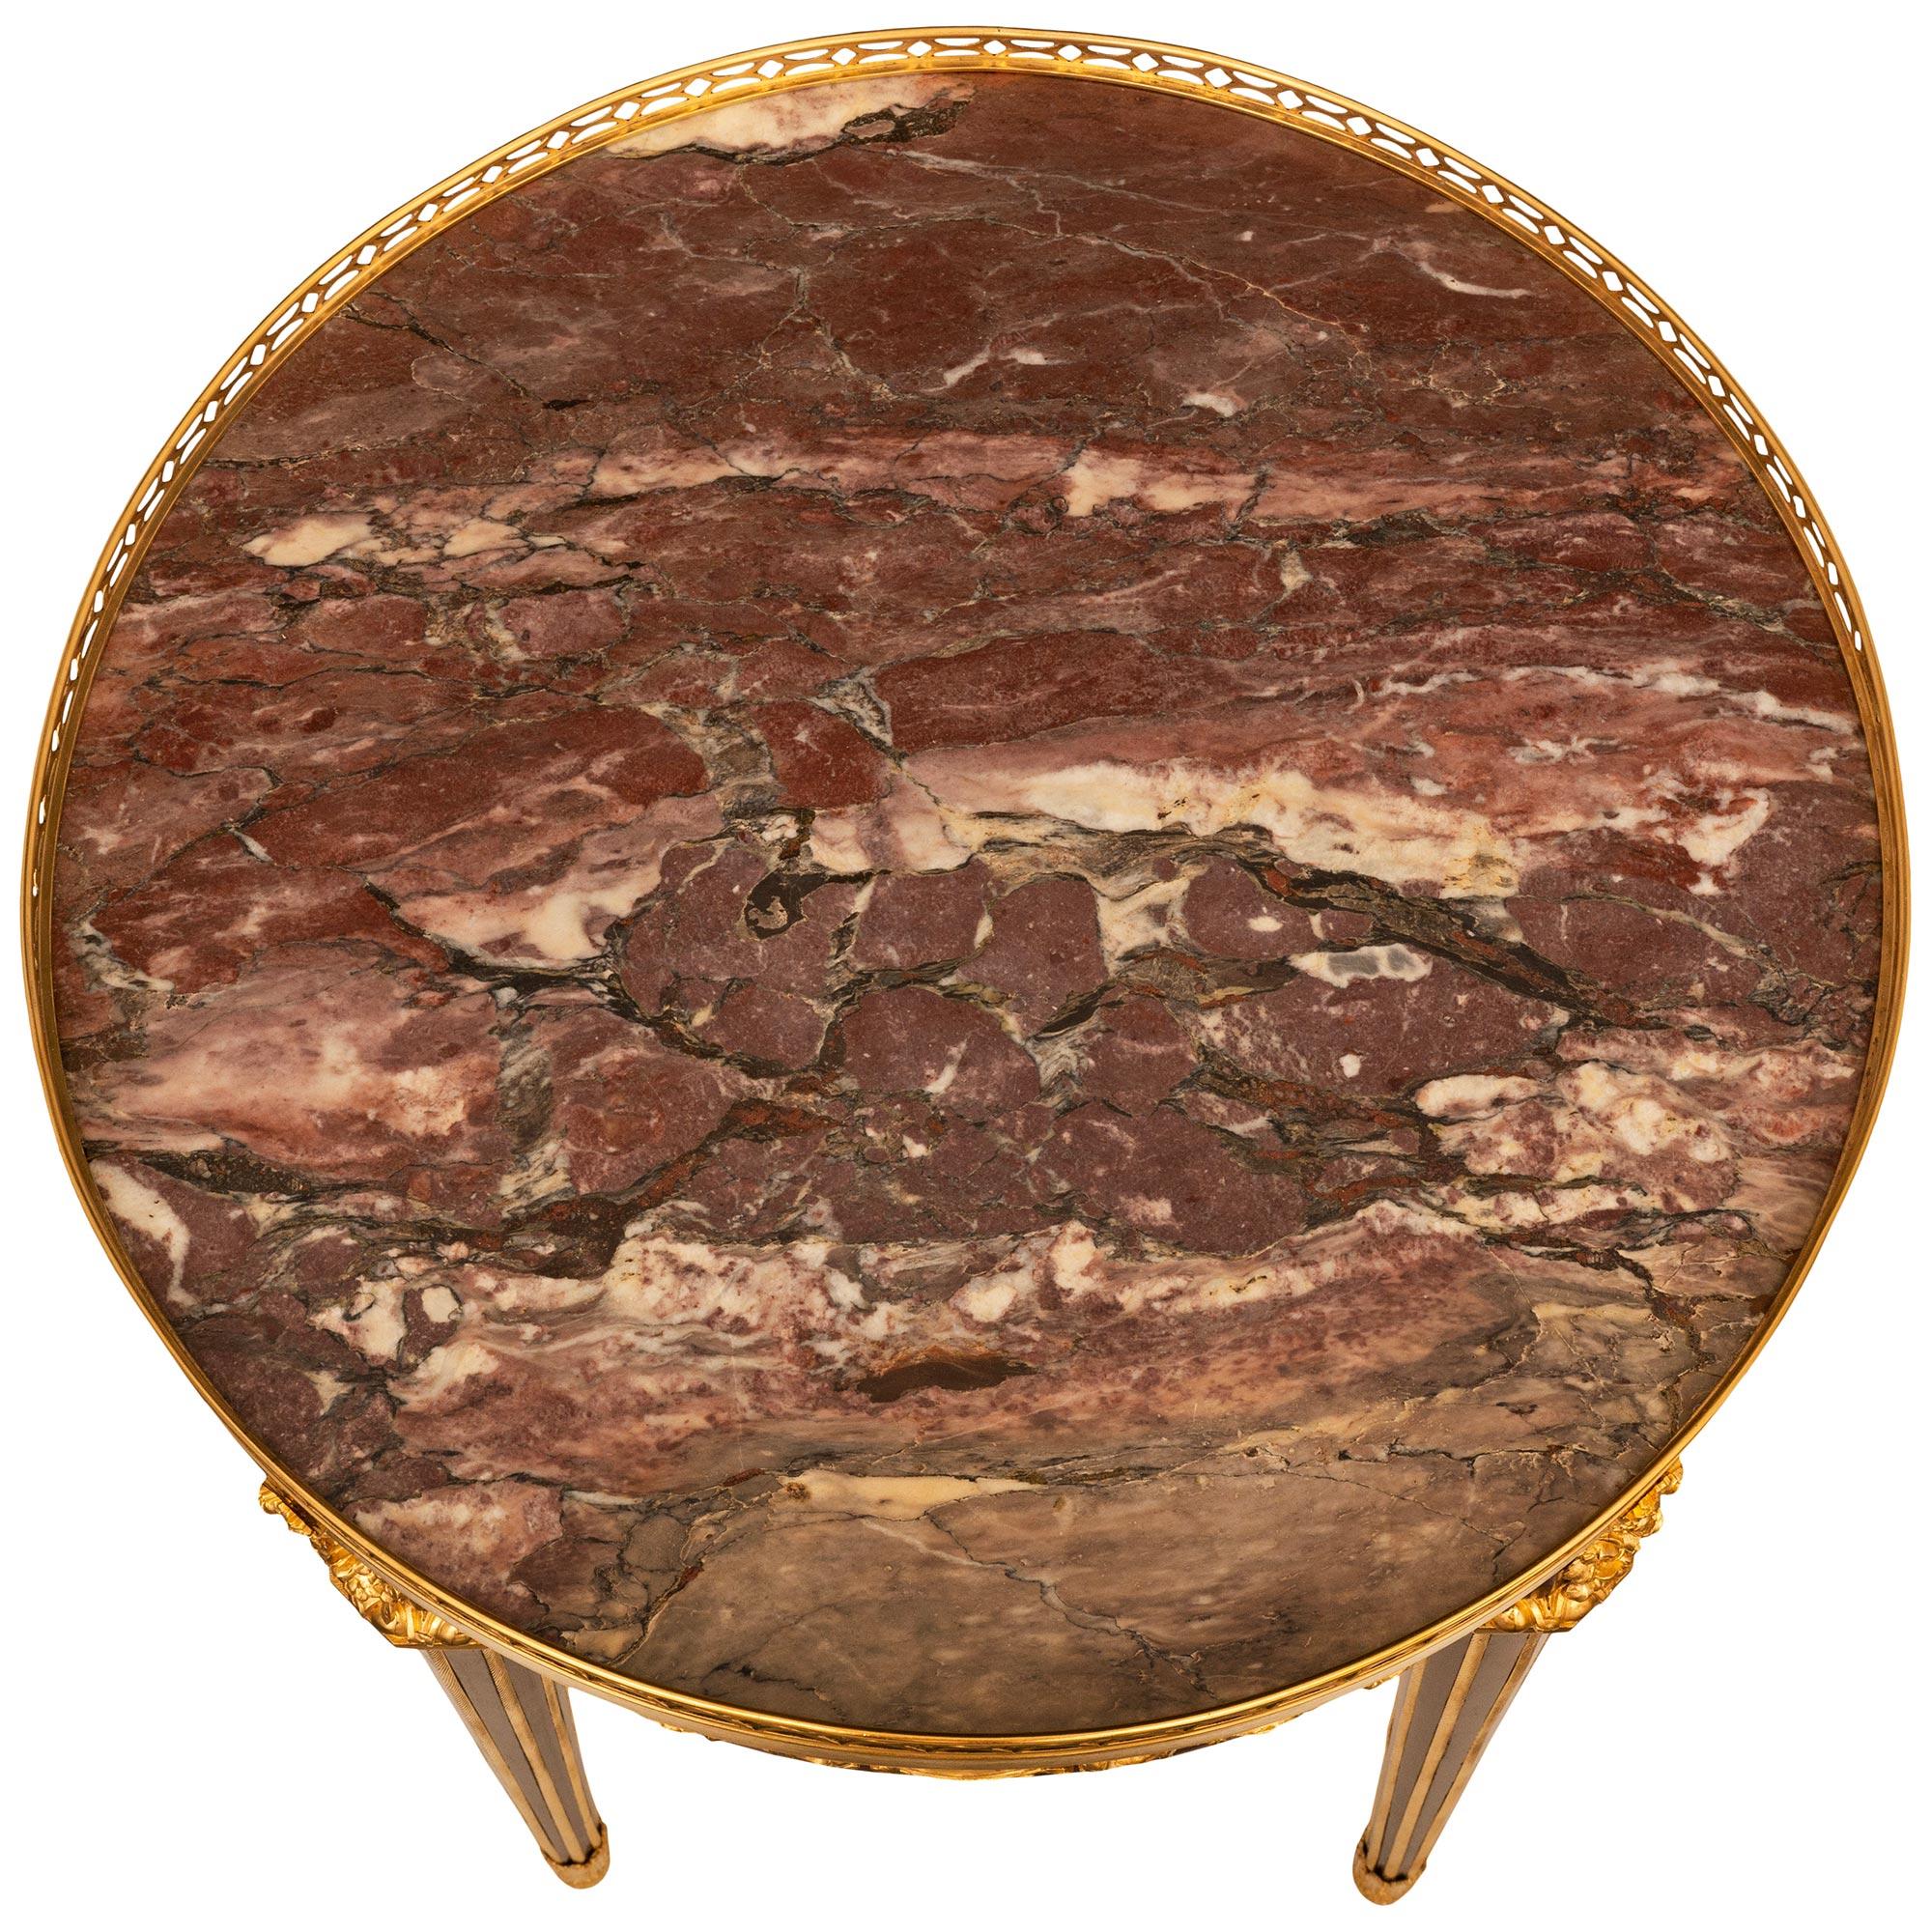 A stunning and highly quality French 19th century Louis XVI st. Mahogany, Satinwood, Ormolu, and Breccia Violette Marble side table, attr. to Theodore Millet. This exquisite single drawer circular side table is raised by four octagonal tapered